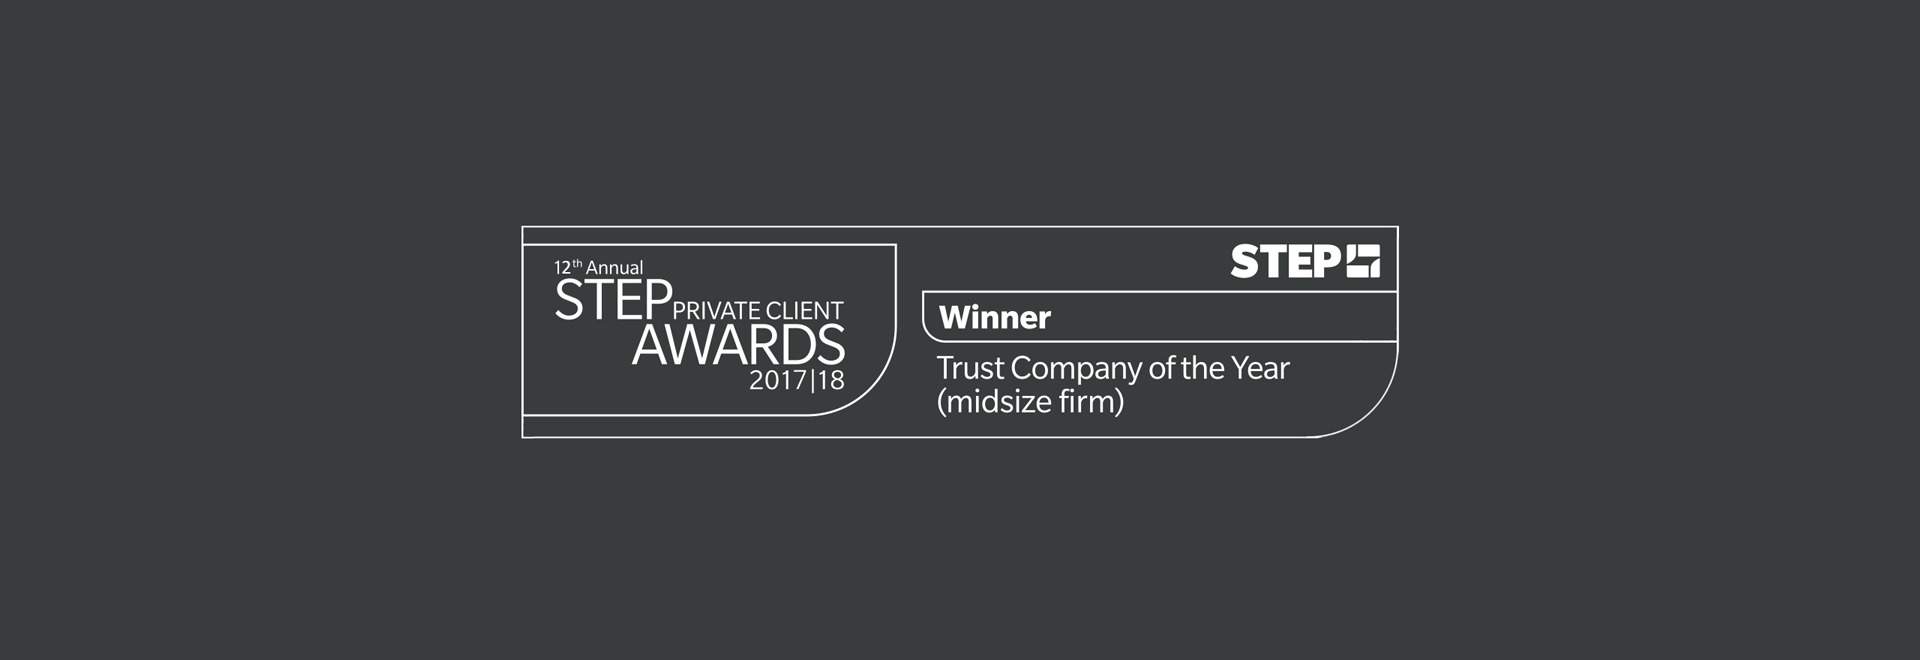 Accuro wins STEP Best (mid-size) Trust Company 2017/18 Award